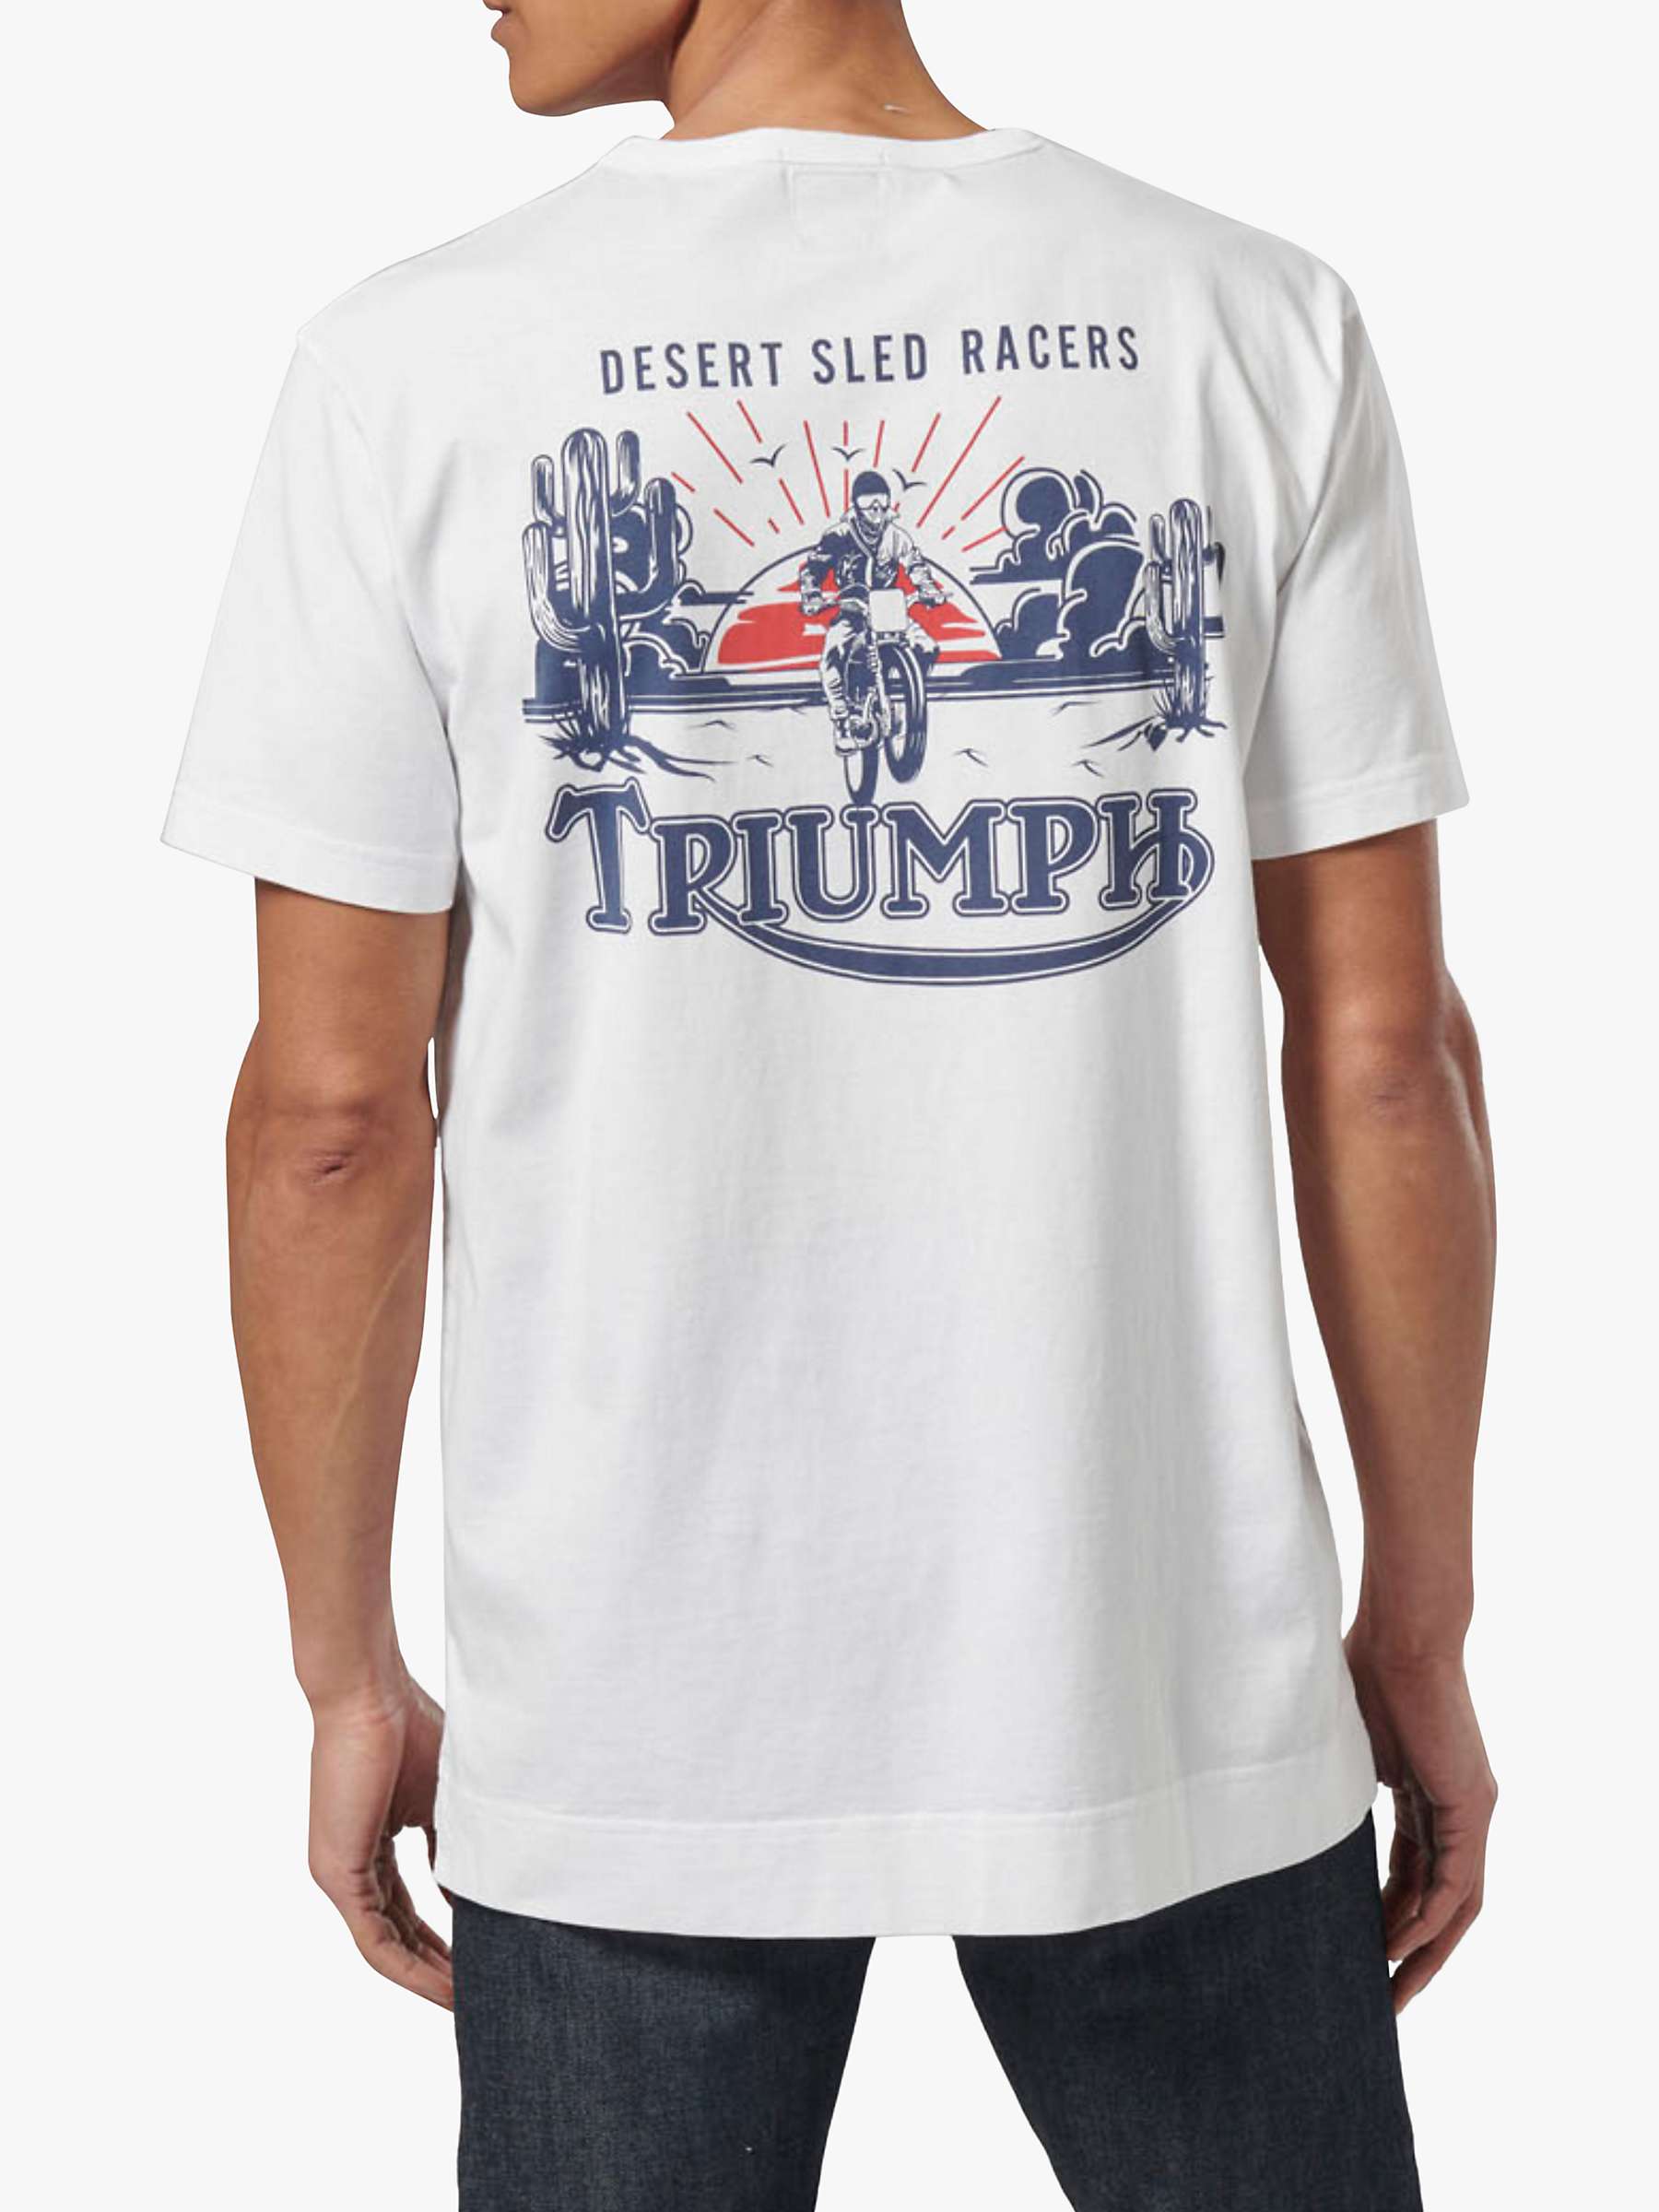 Buy Triumph Motorcycles Sled Print T-Shirt, White Online at johnlewis.com